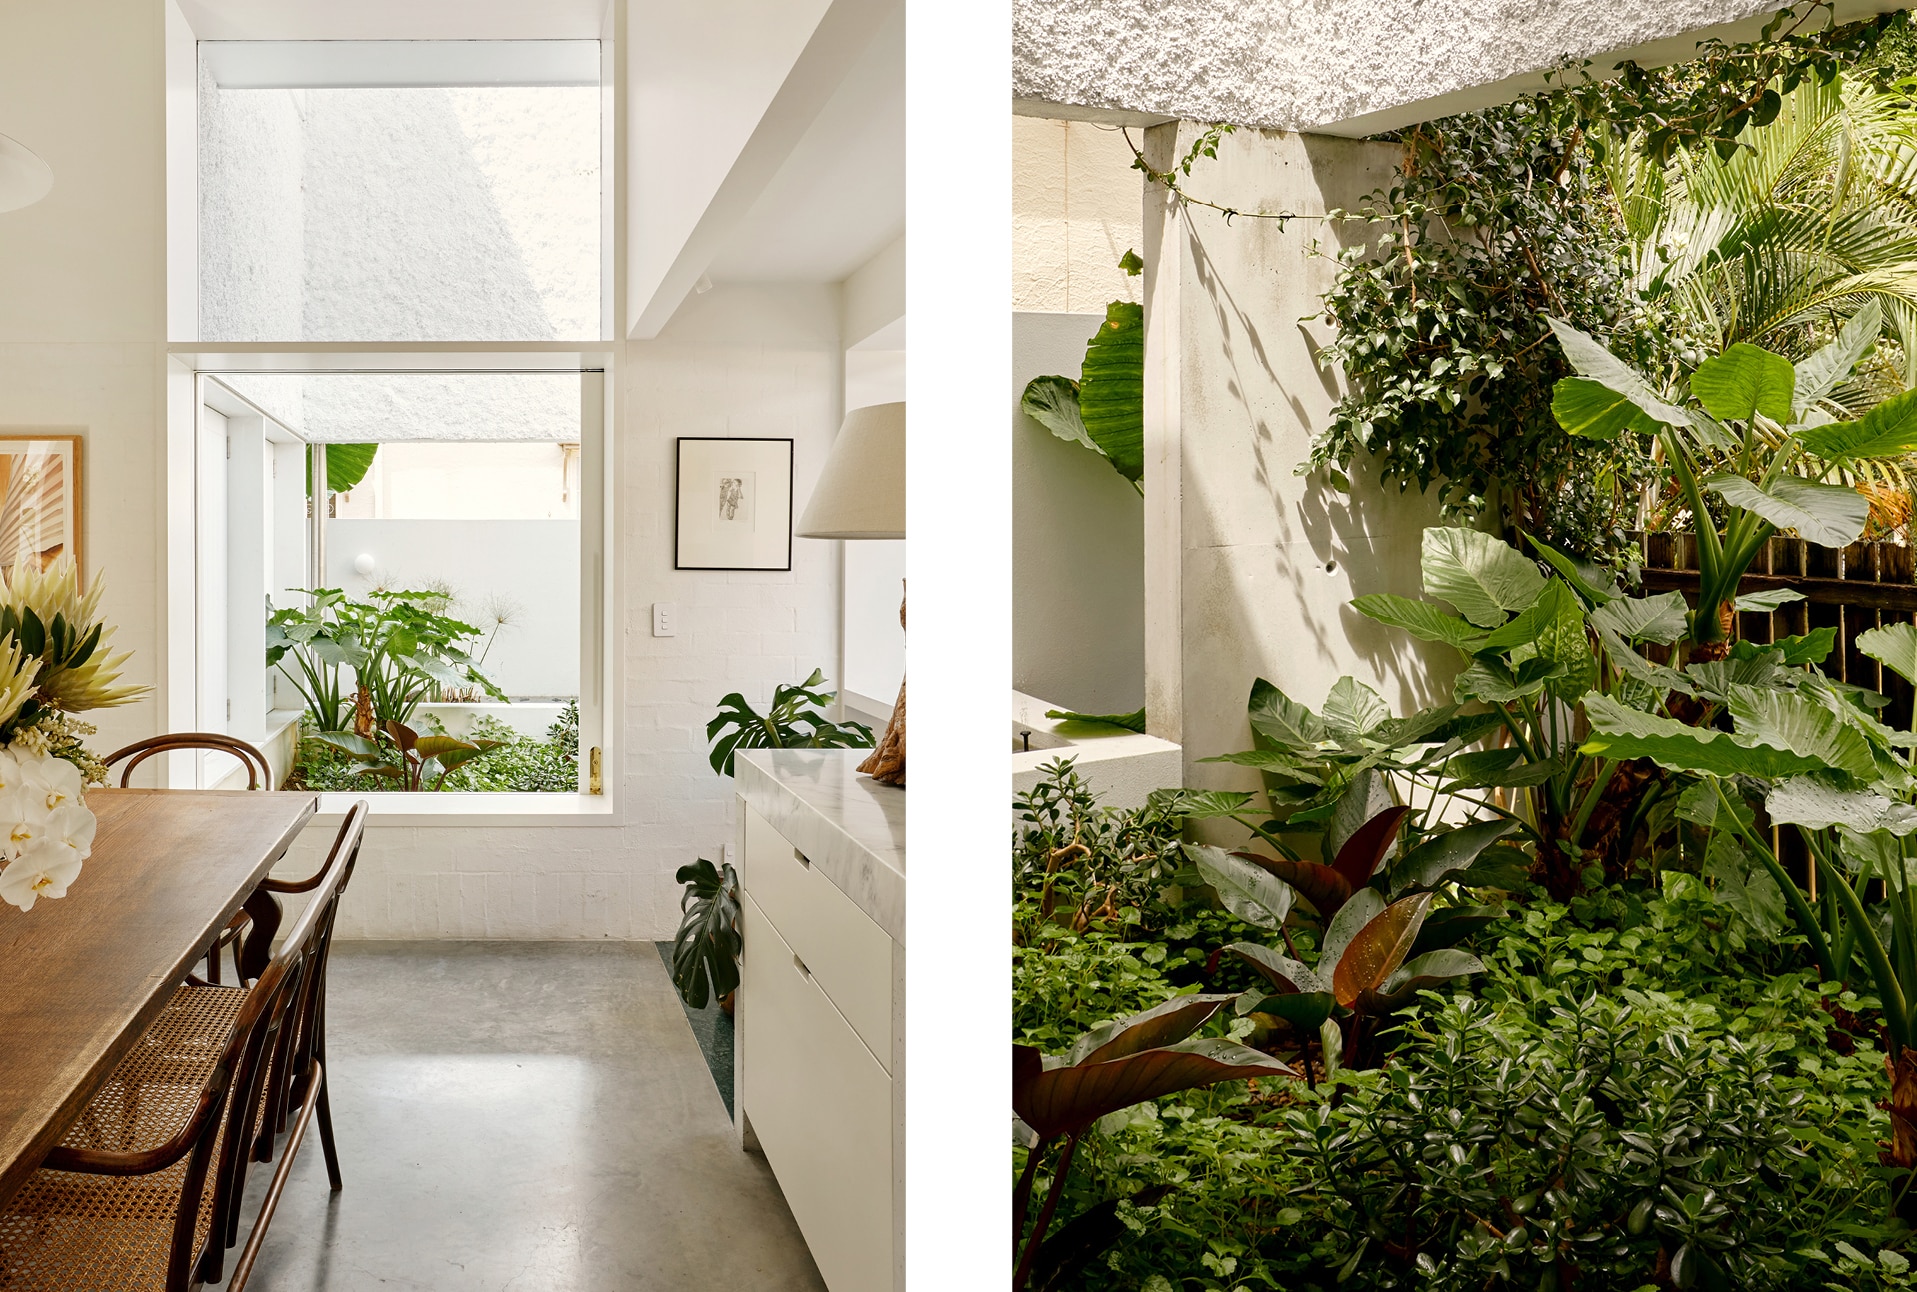 split image. left side a shot down the kitchen, wooden dining table to left, white cabinets on right. out the window you can see the garden. right side: a shot within the garden, overflowing with leafy green bushes and plants.